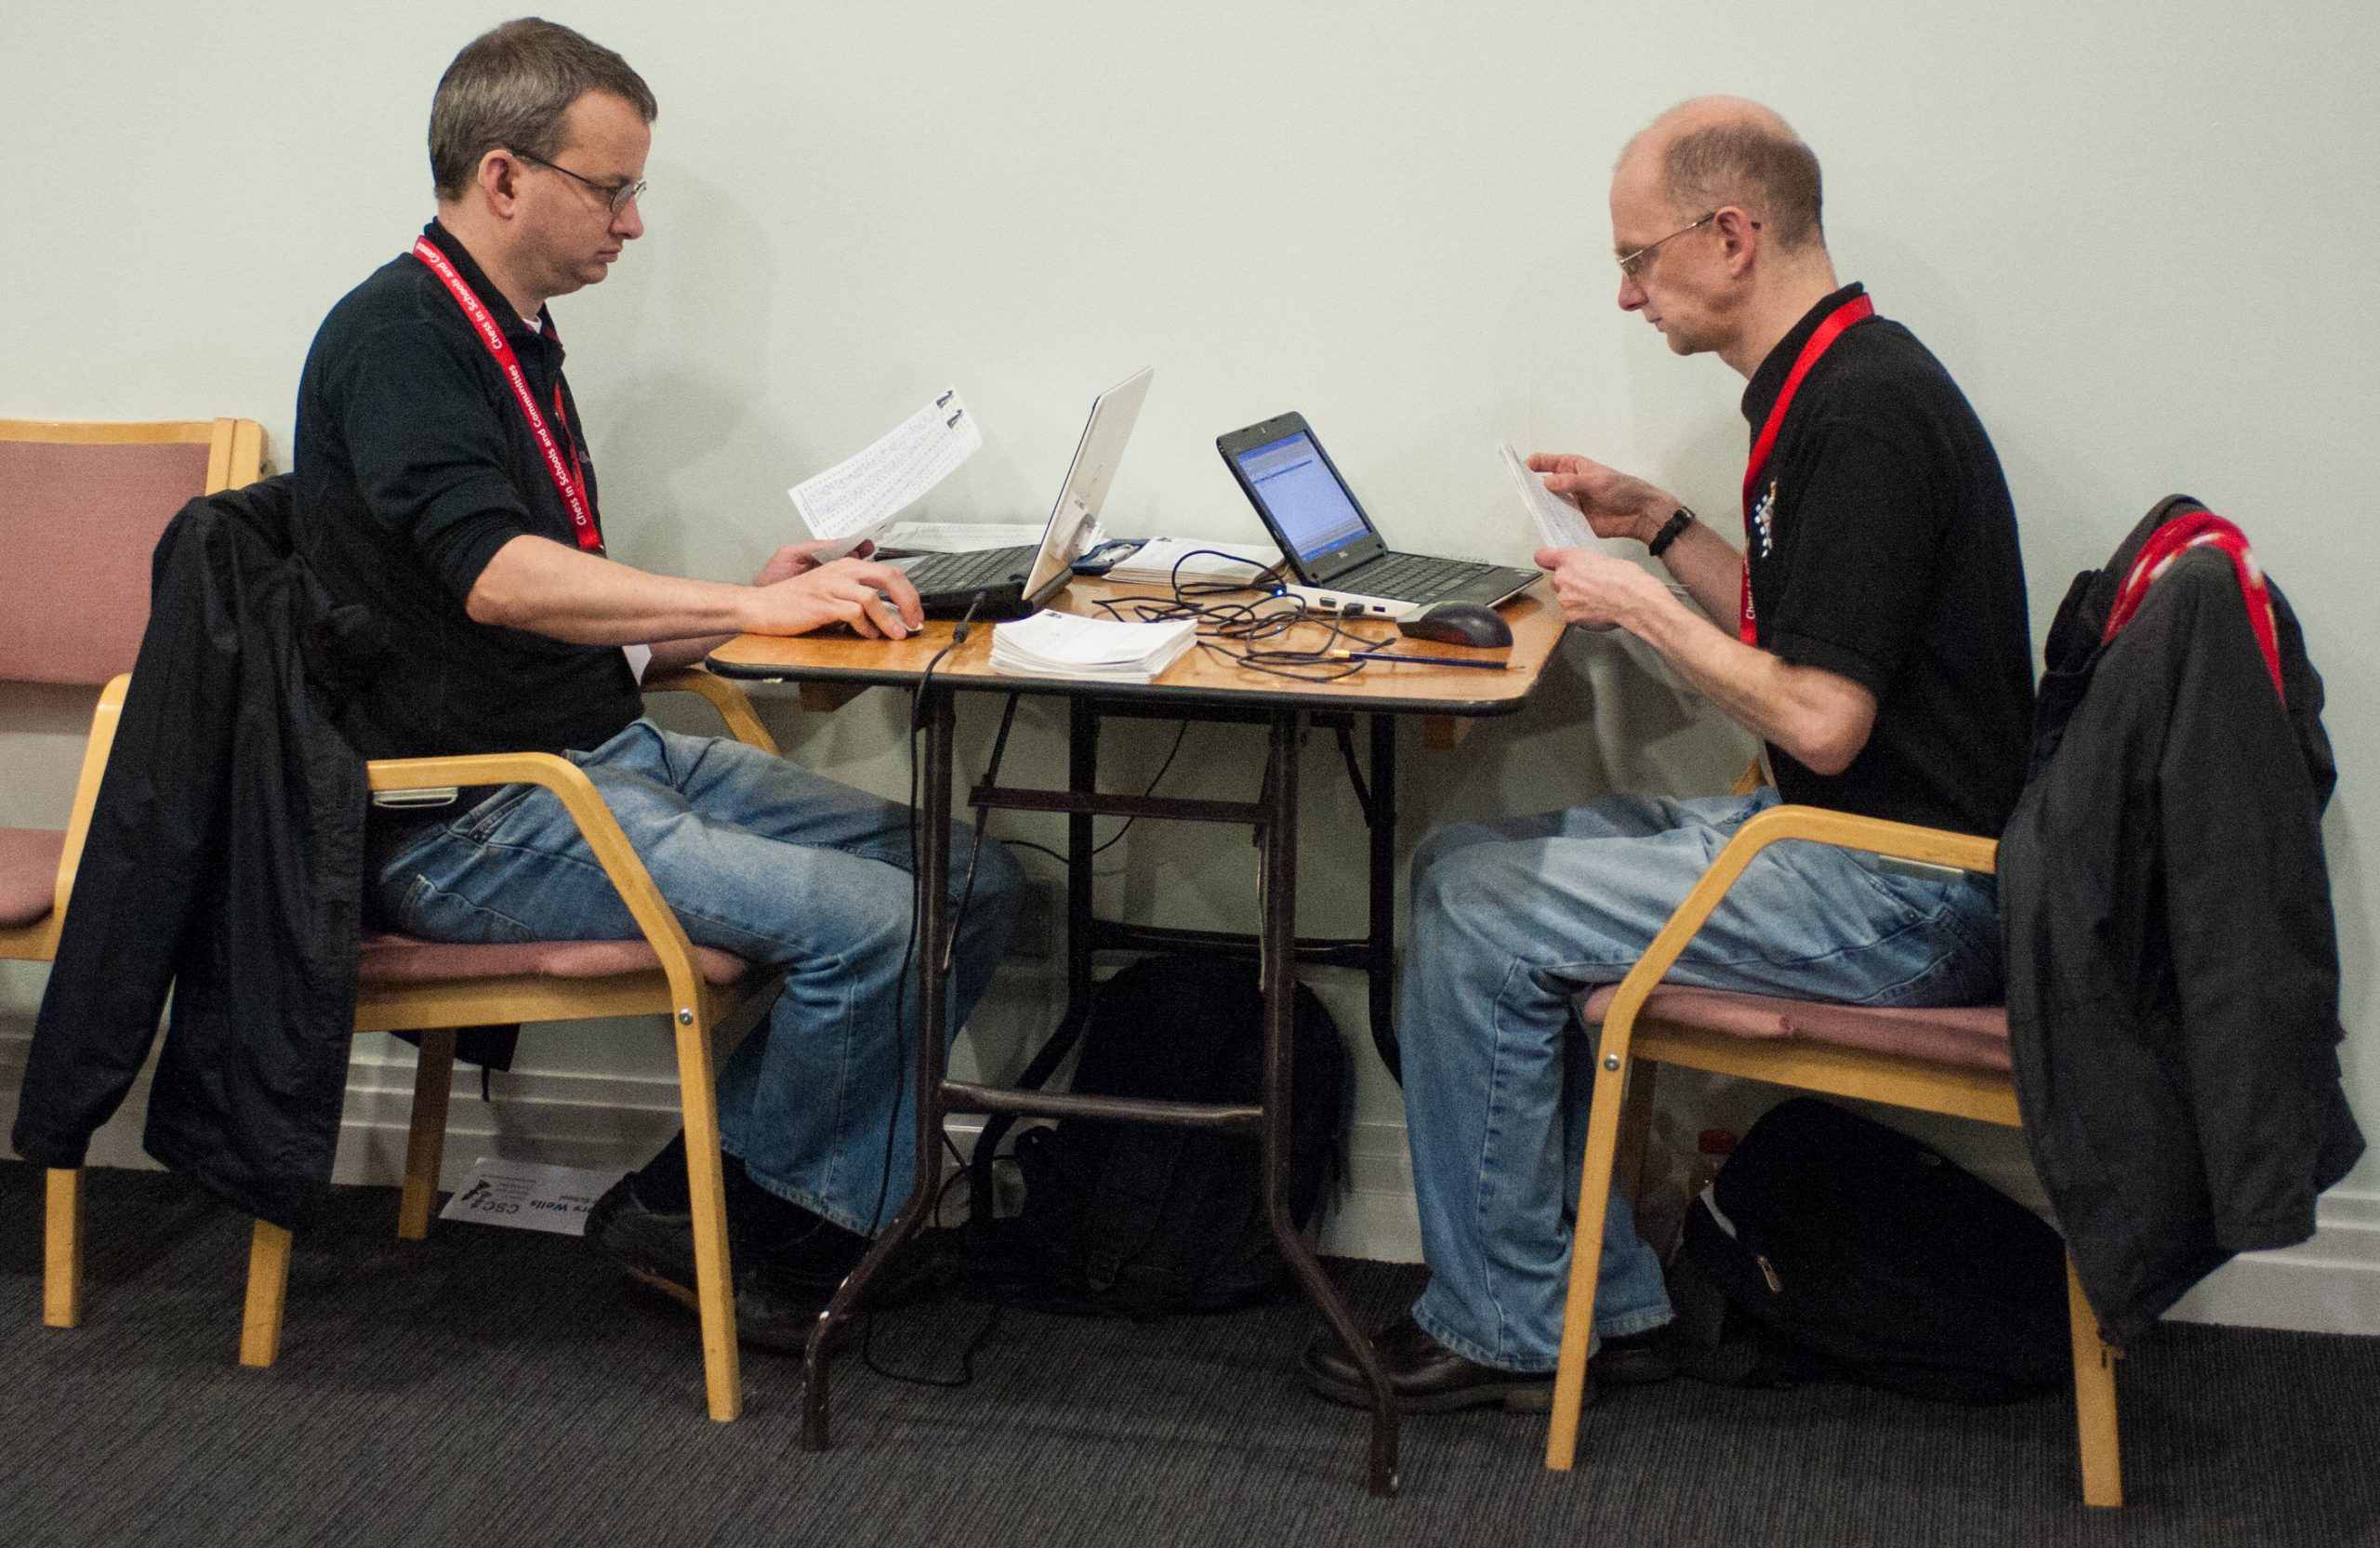 Tim Dickinson and Lawrence Cooper at the 2012 London Chess Classic, Olympia